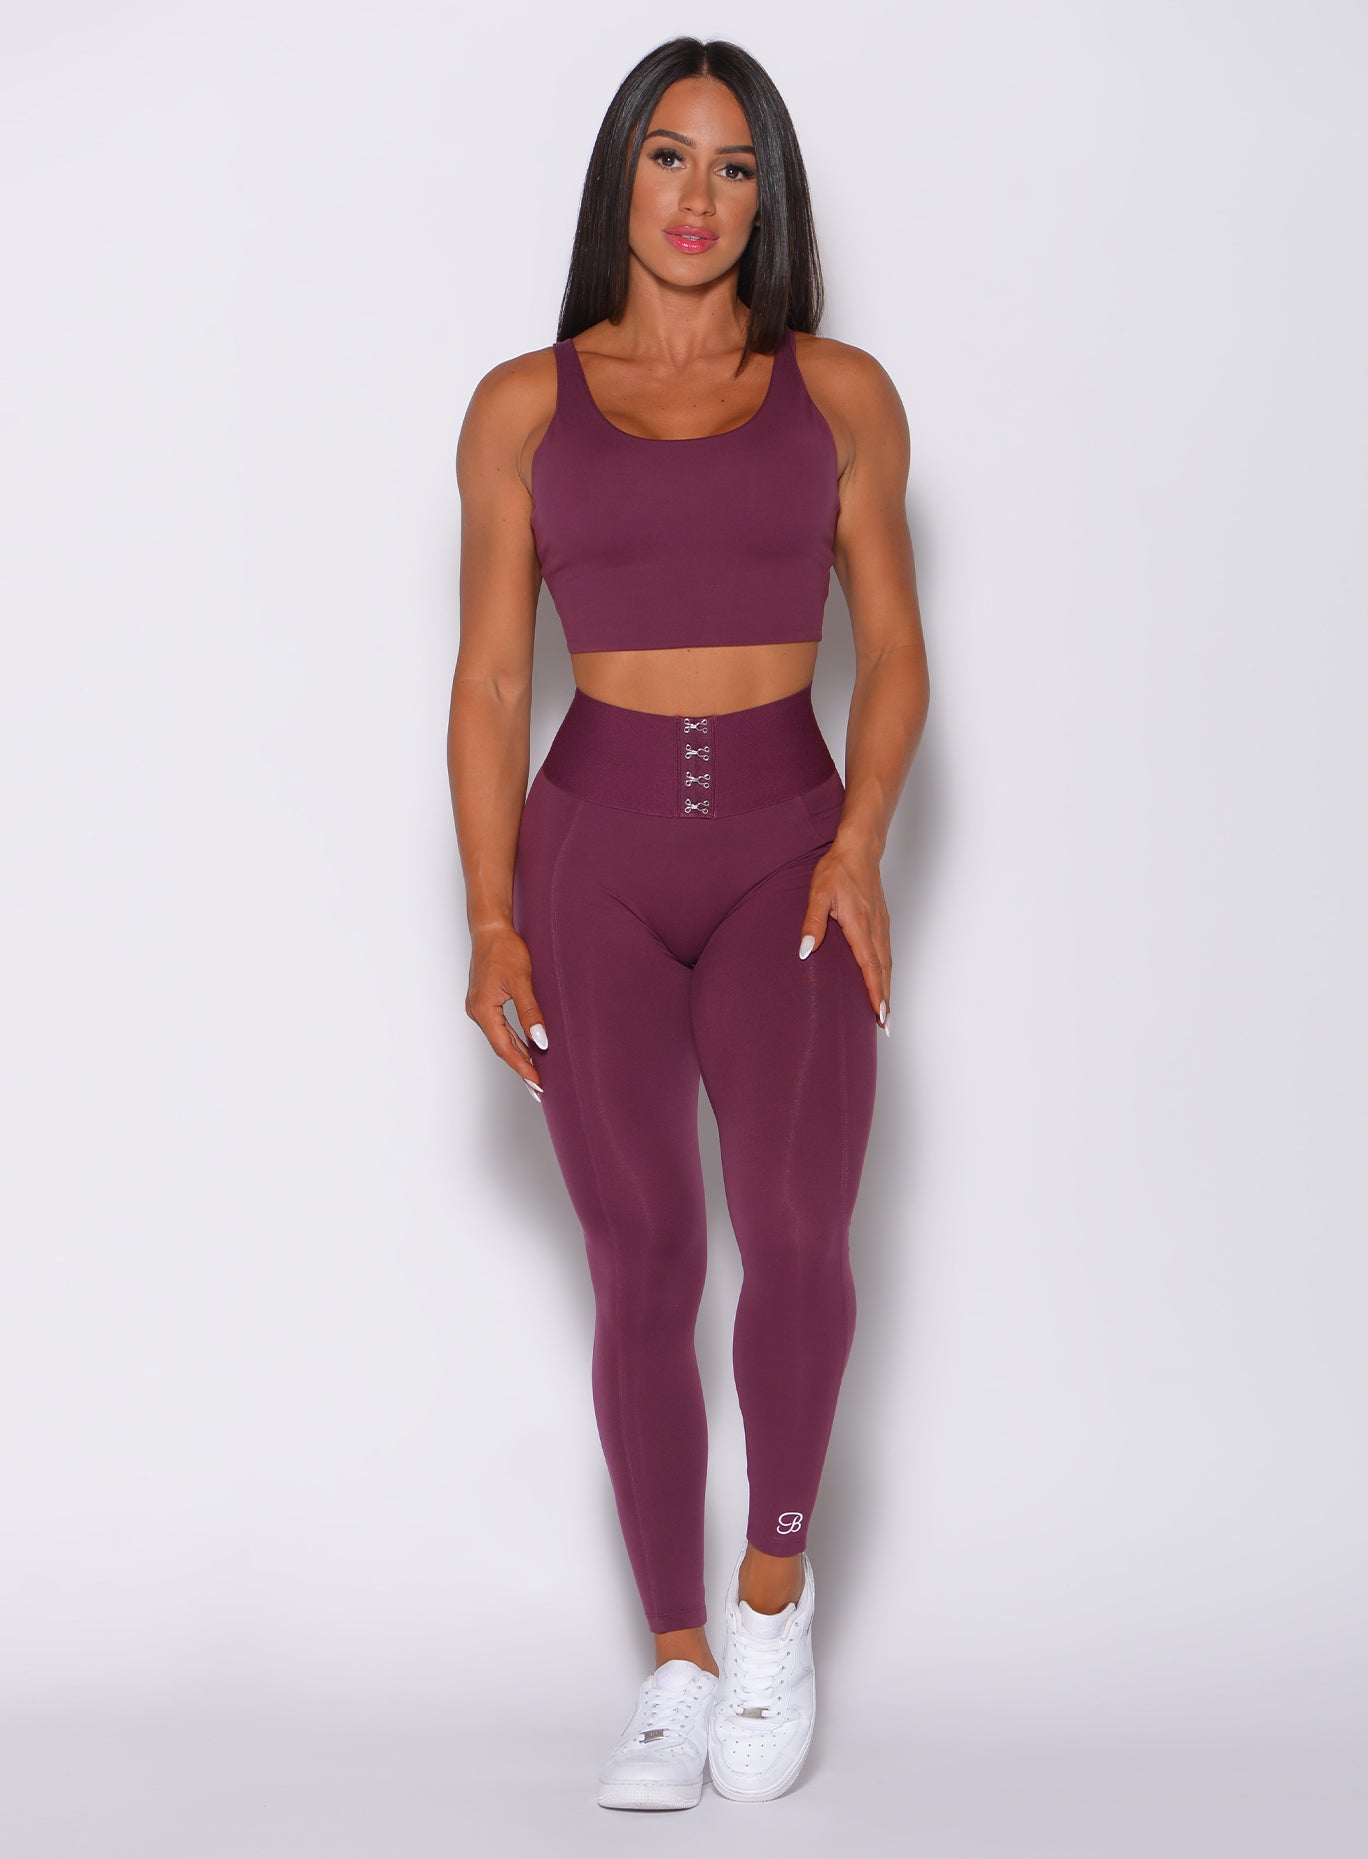 Front profile view of a model in our waist cincher leggings in majestic purple color and a matching sports bra